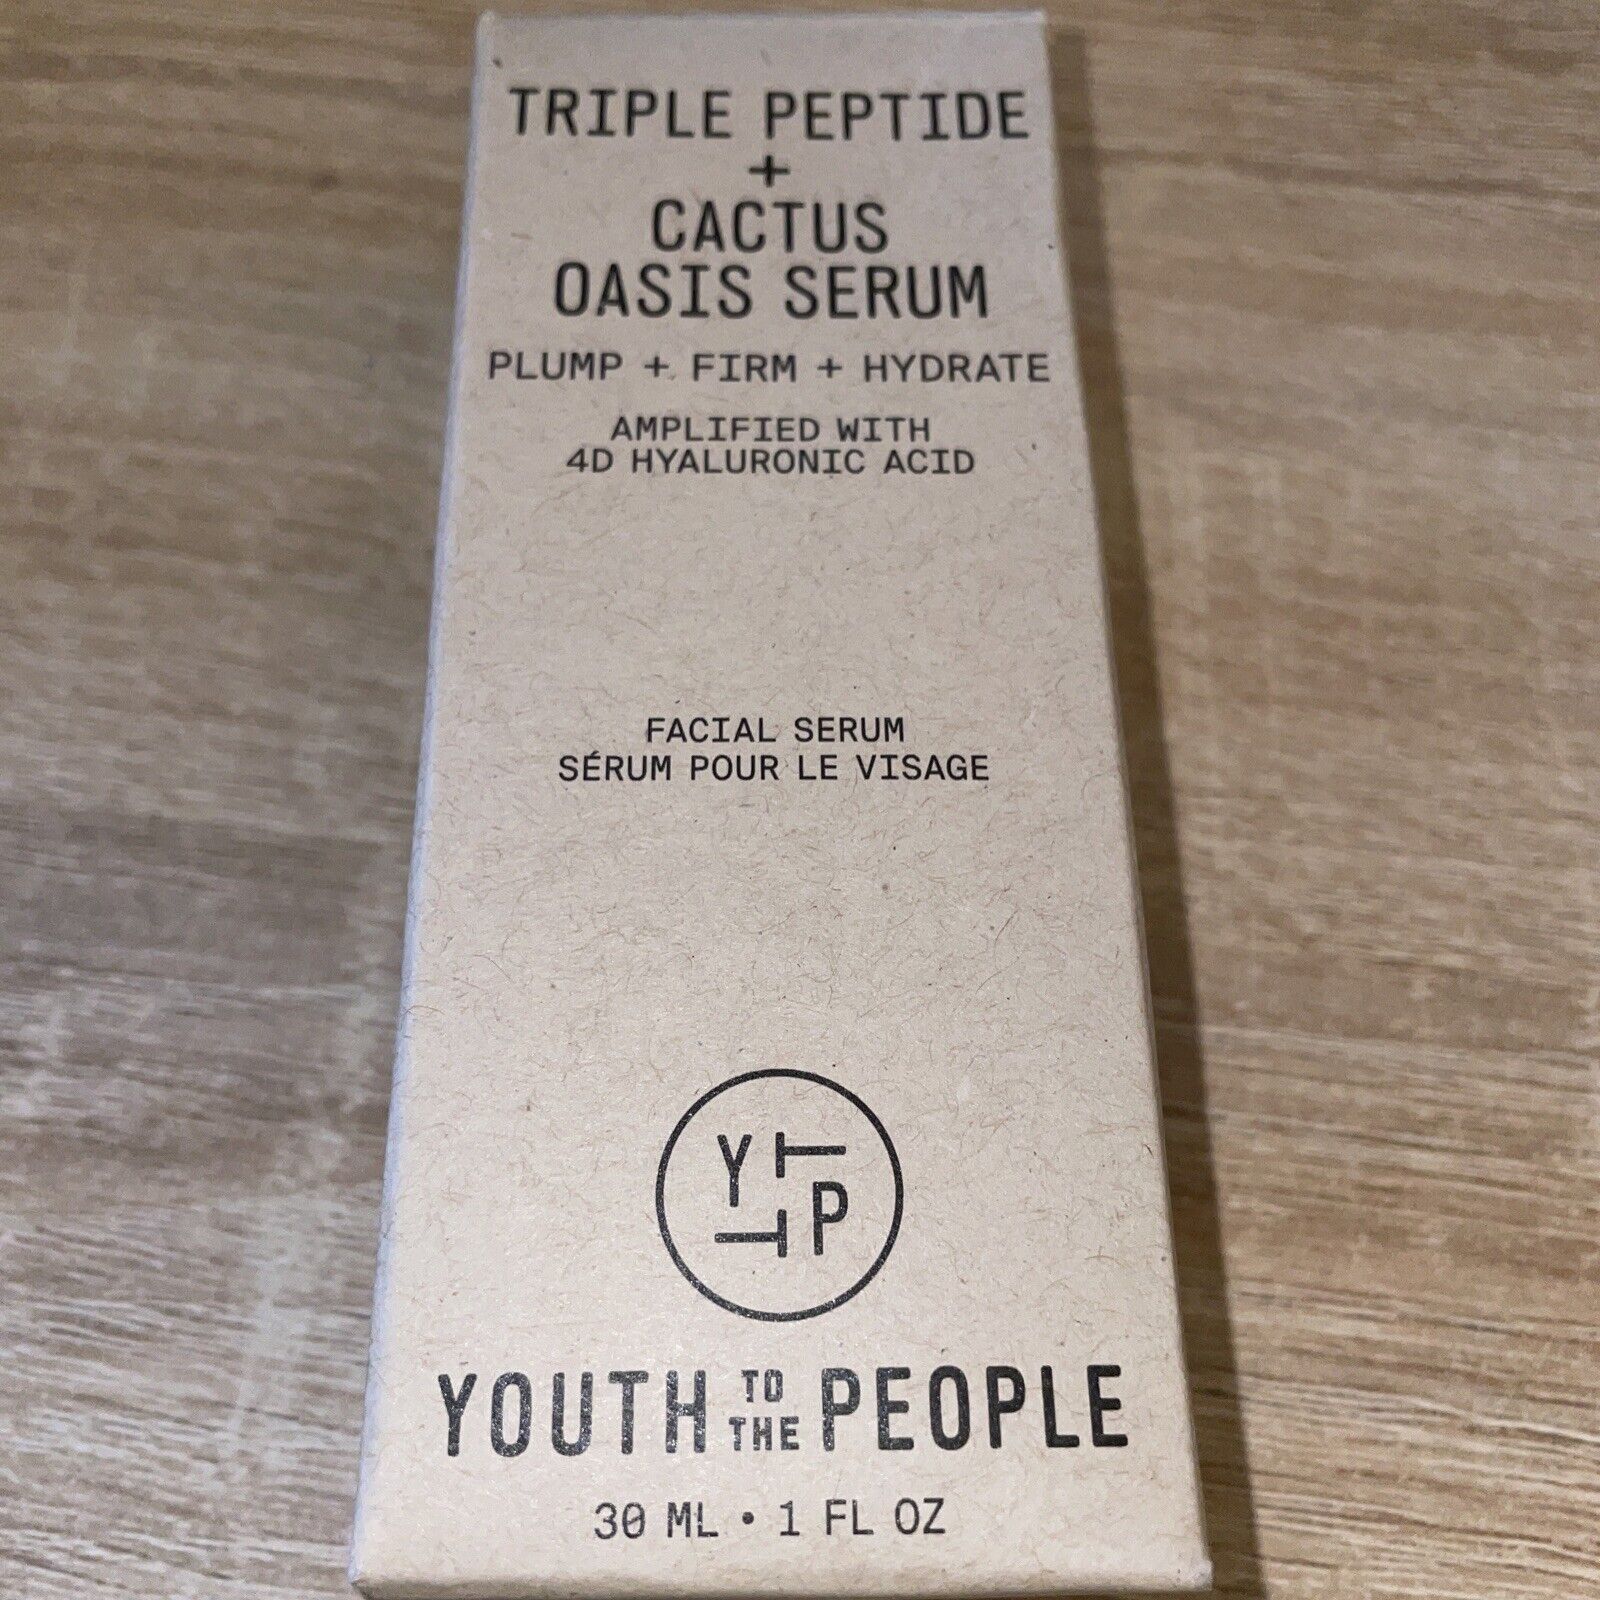 YOUTH TO THE PEOPLE TRIPLE PEPTIDE + CACTUS OASIS SERUM